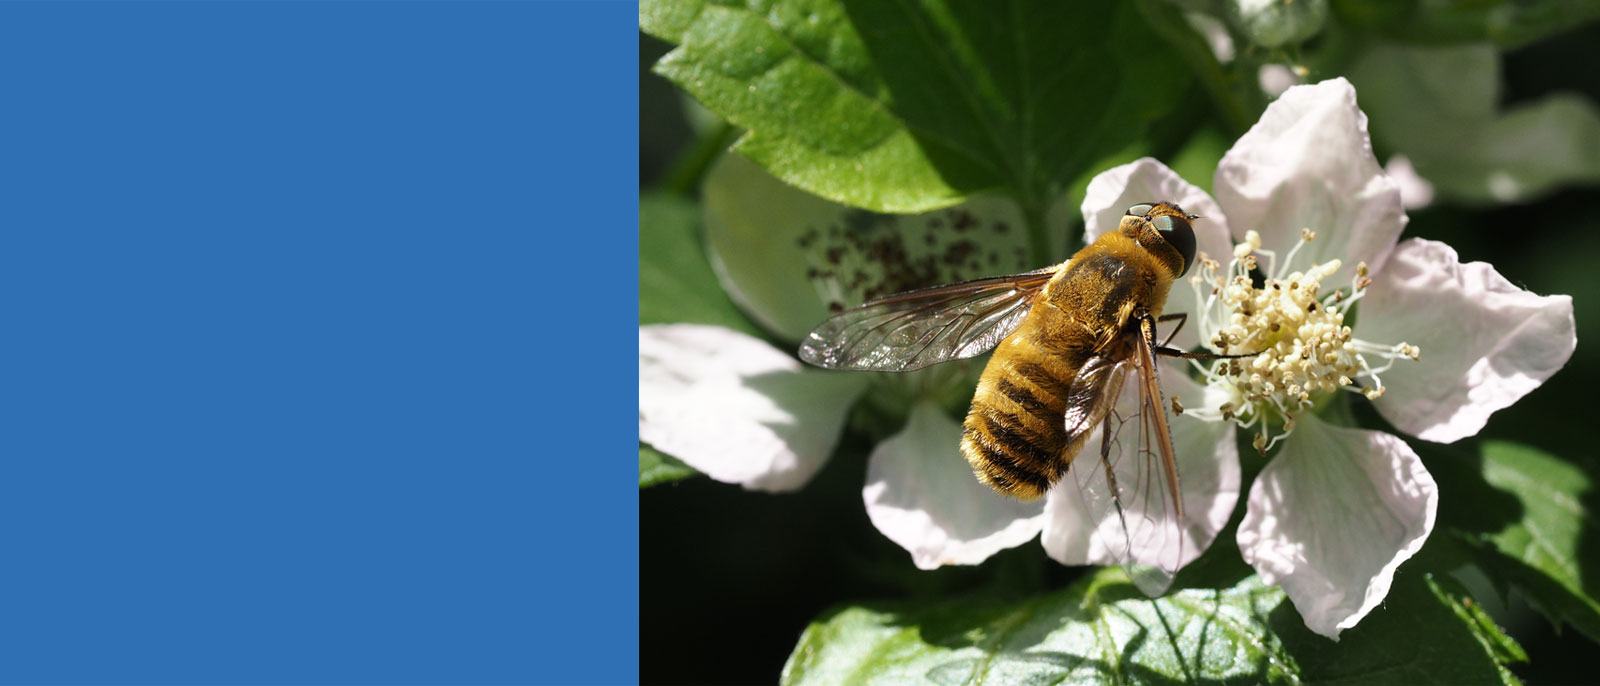 It is important for pollinators to preserve their flowering and nesting habitats.